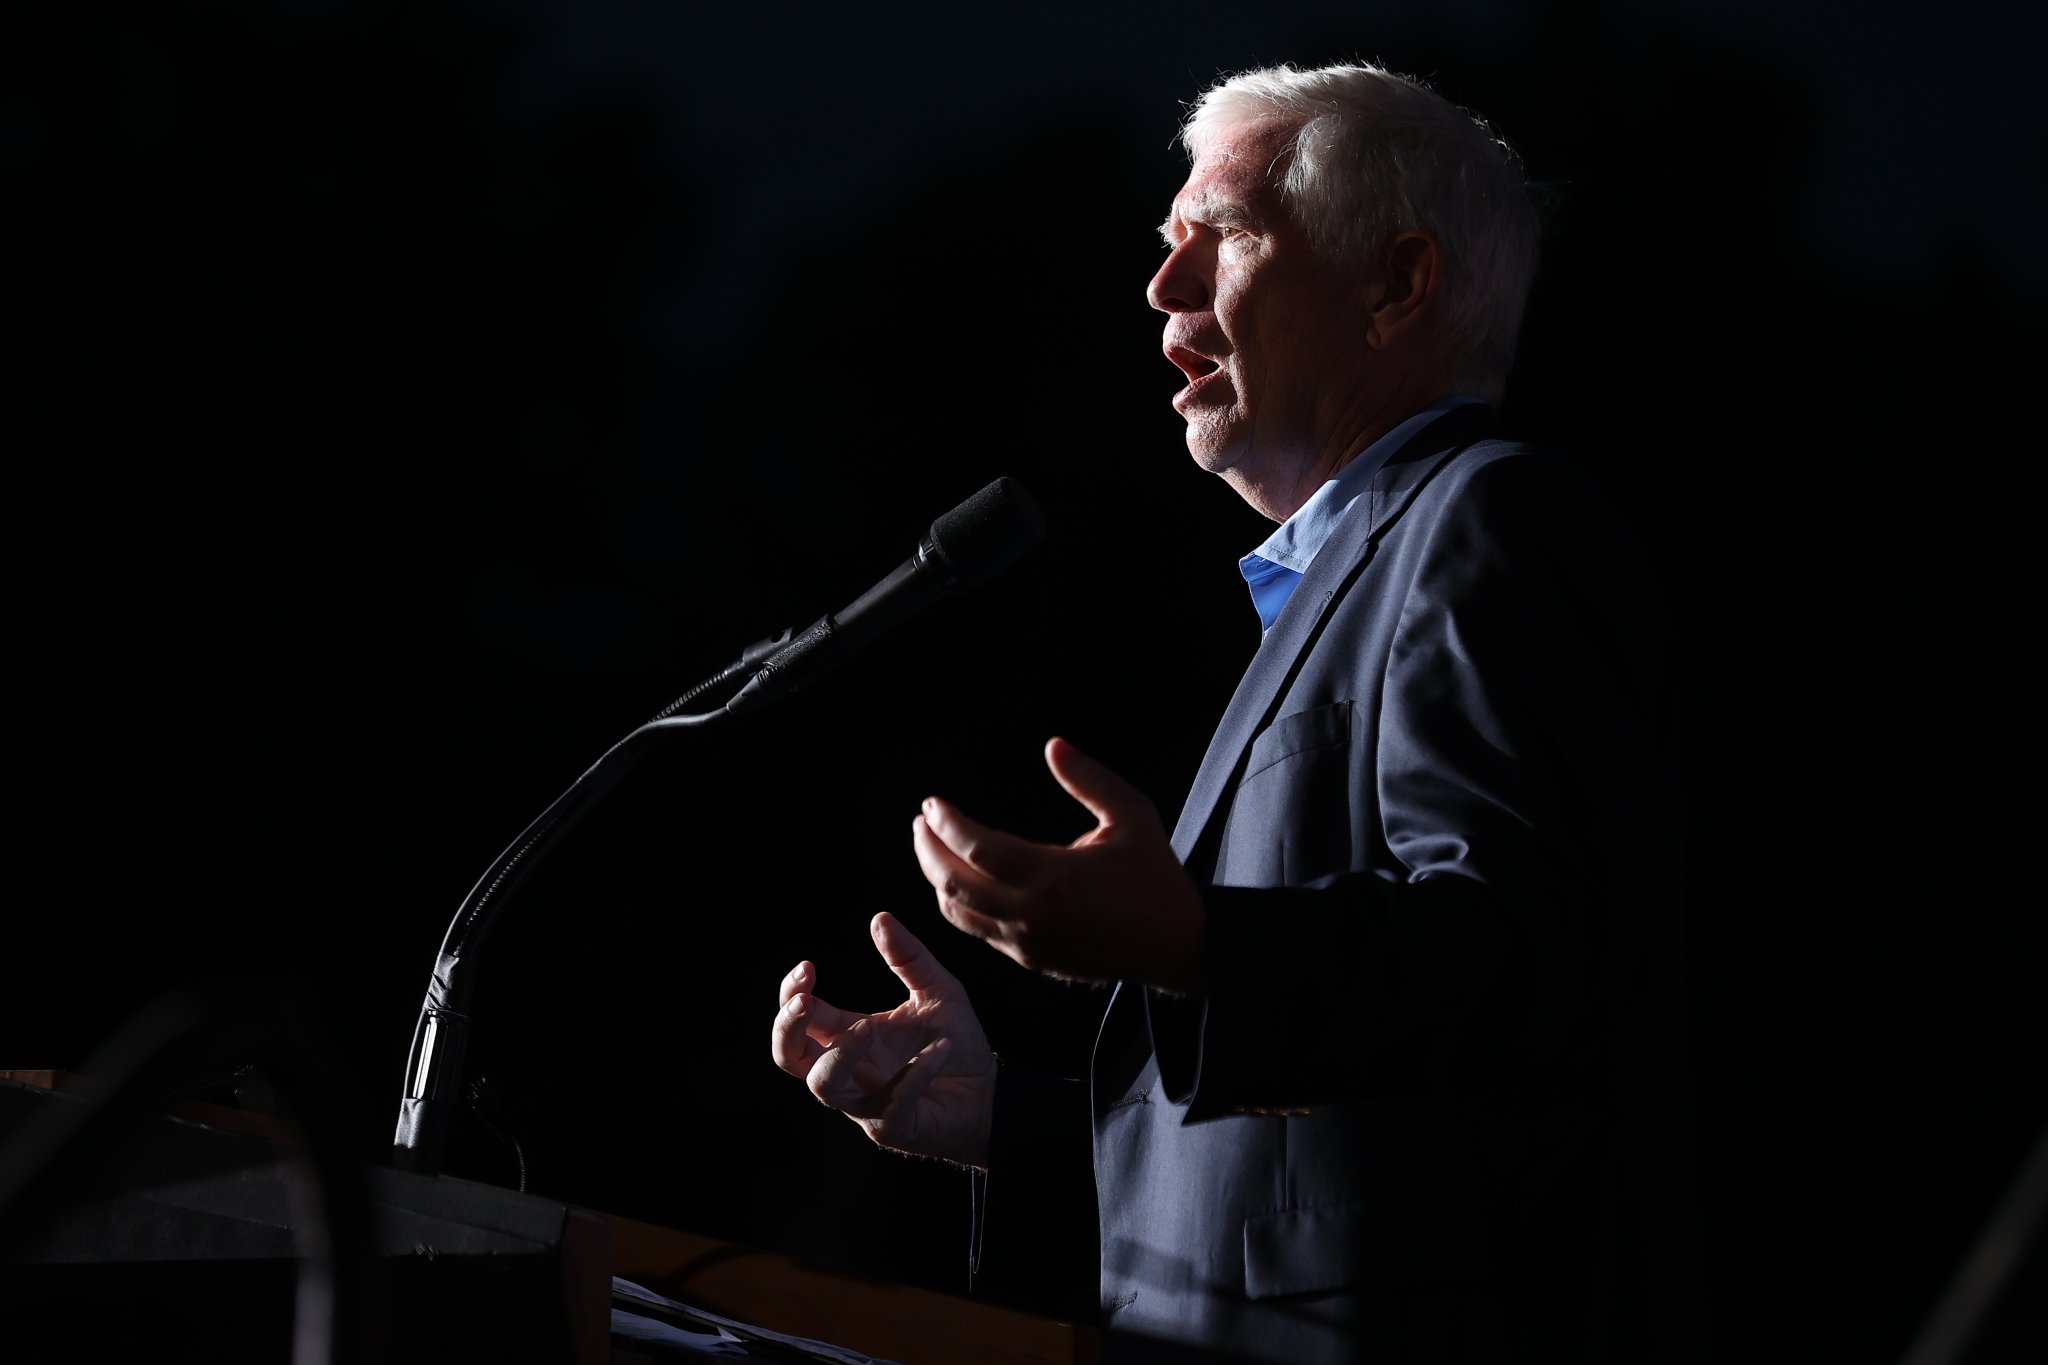 Trump ditched Mo Brooks for going ‘woke.’ Now he’s rising again in the polls.